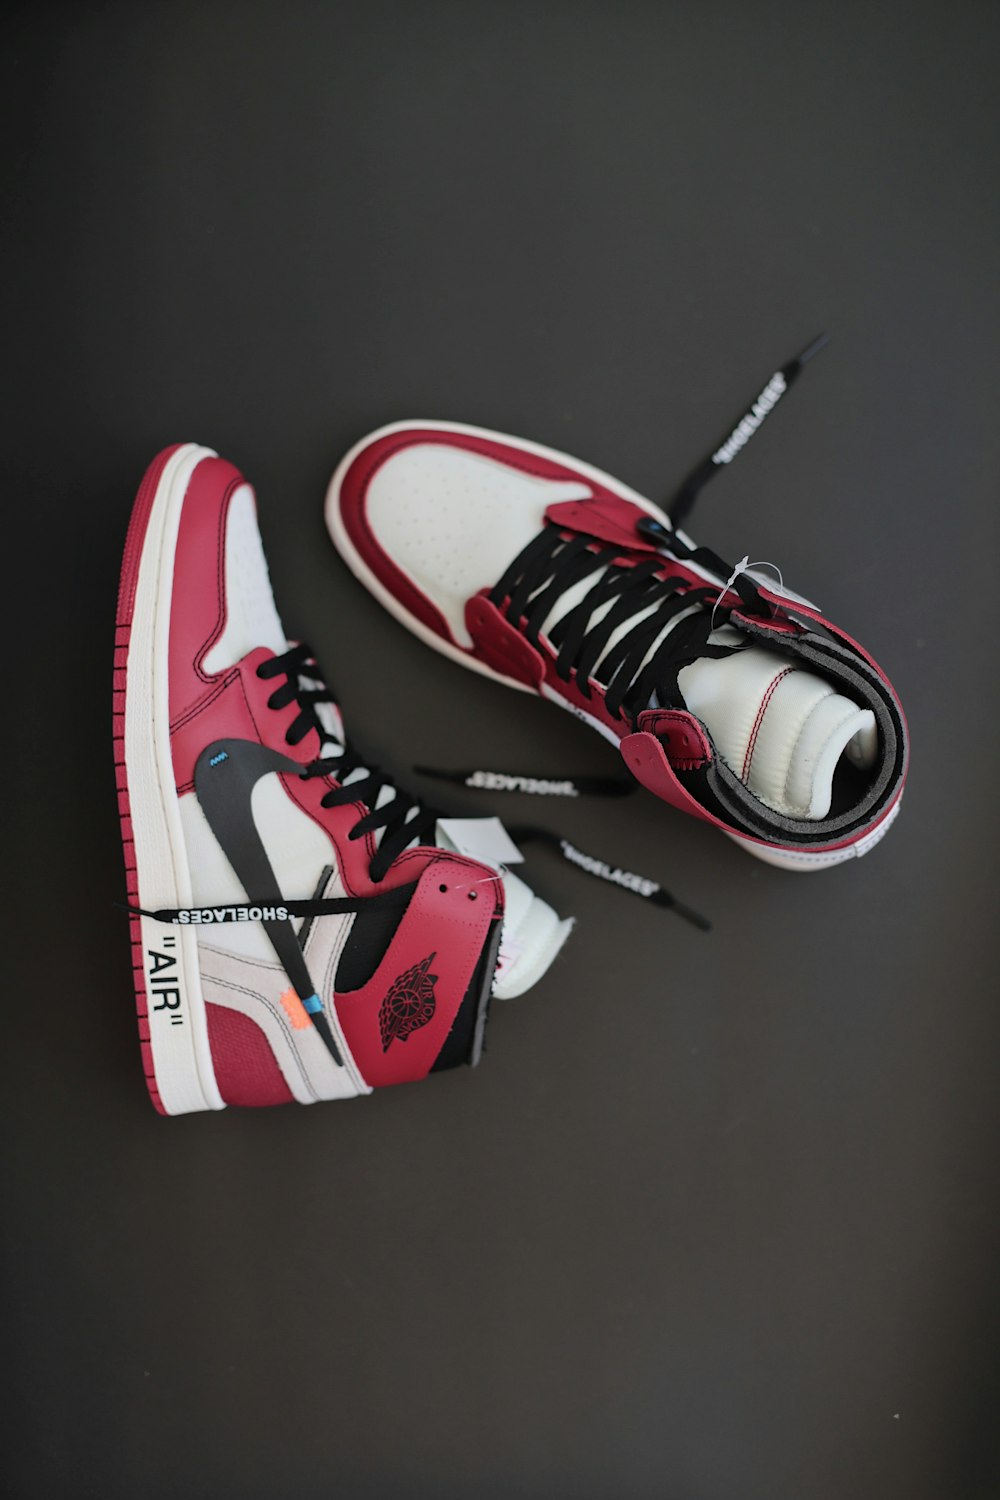 pair of red-white-and-black Nike Air Jordan athletic shoes